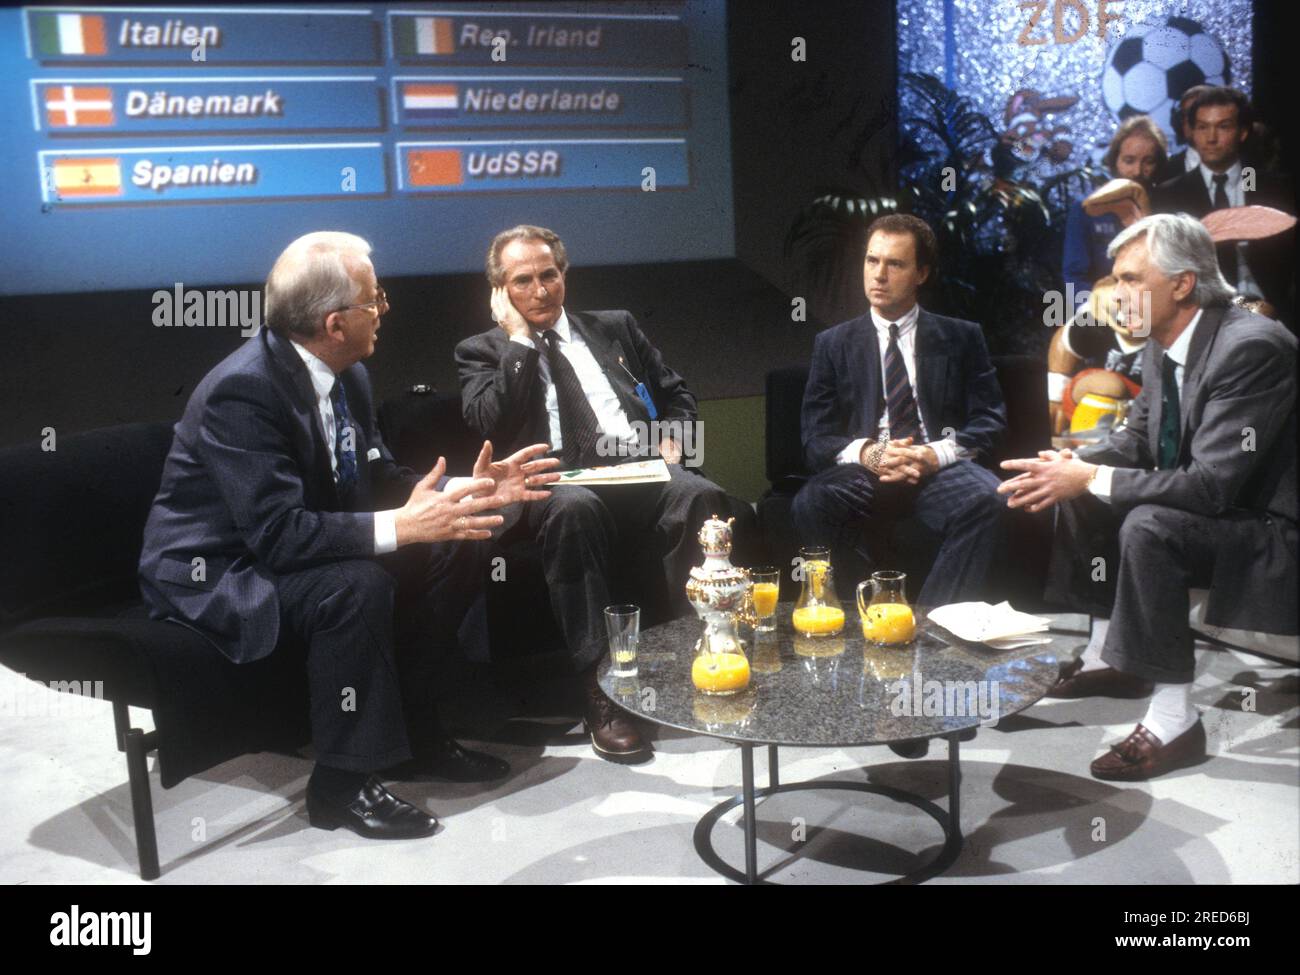 European Championship 1988 in Germany. Draw of the final round in Düsseldorf 12.02.1988. / from left : DFB President Hermann Neuberger , Coach Azeglio Vicini (Italy), Franz Beckenbauer and ZDF - Moderator Dieter Kürten. [automated translation] Stock Photo